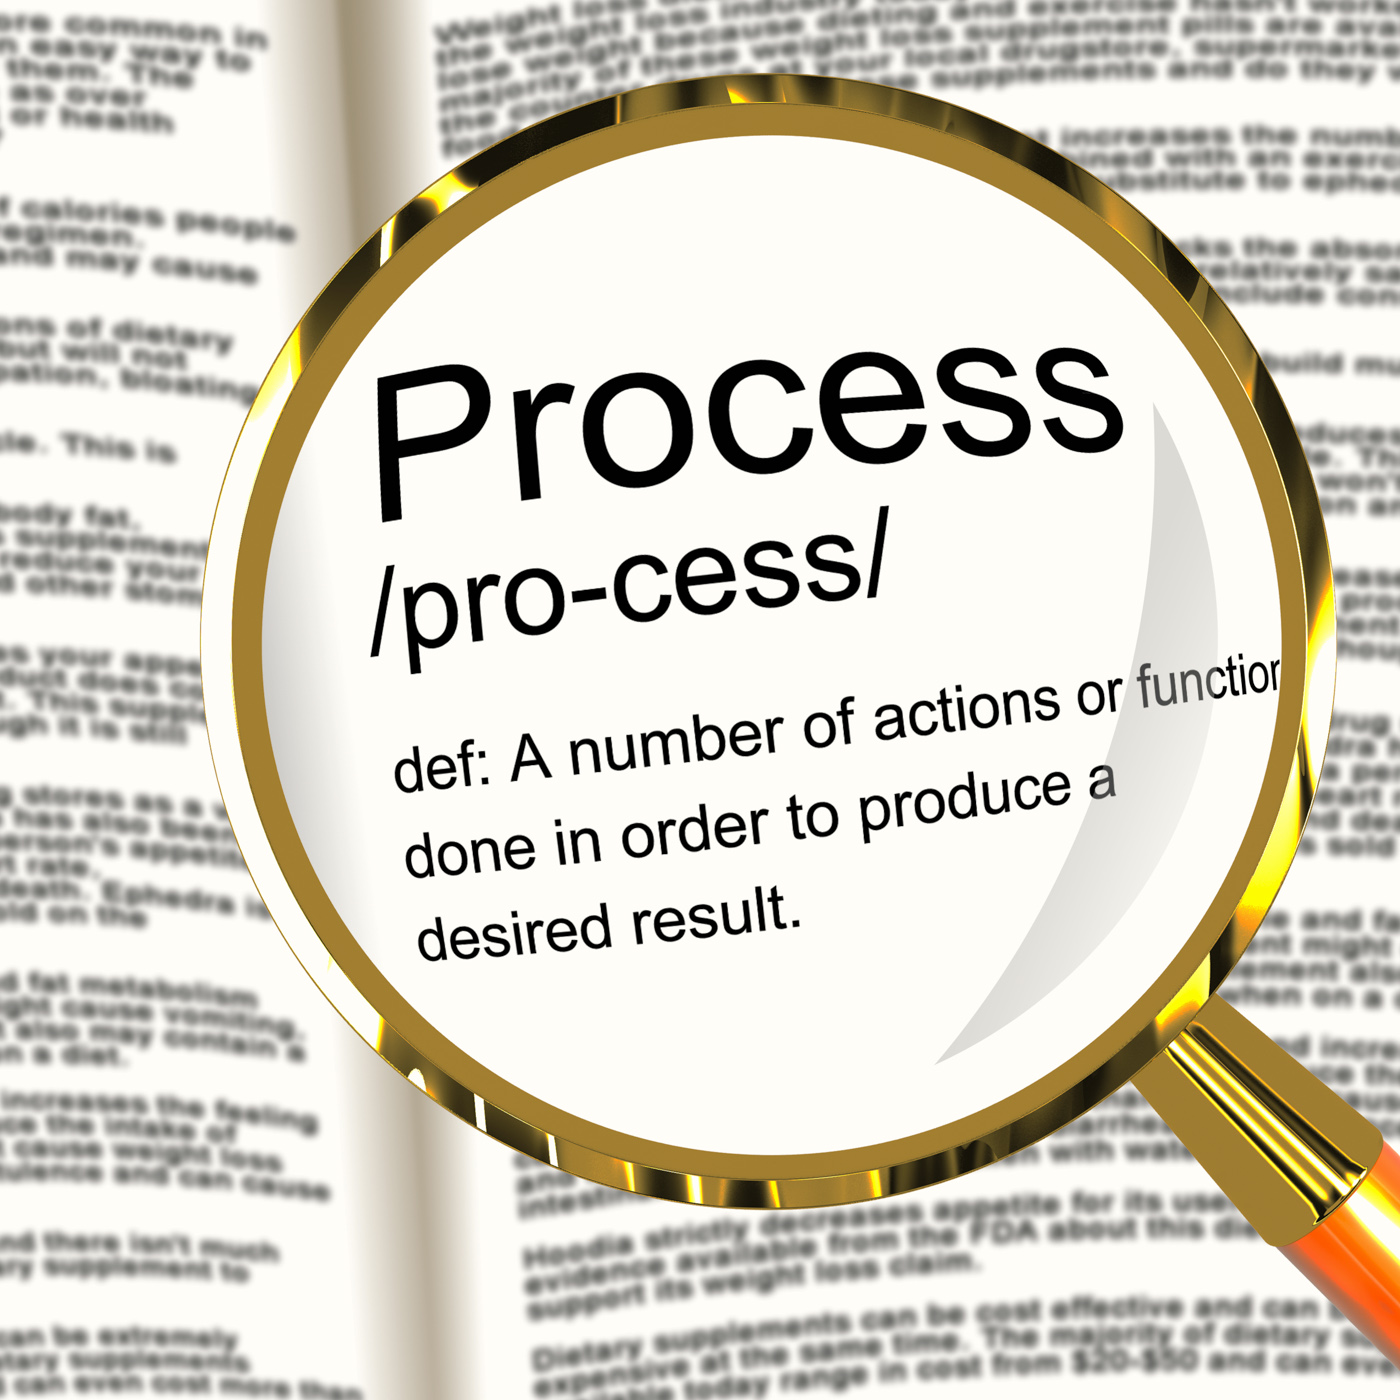 Process definition magnified showing result from actions or functions photo